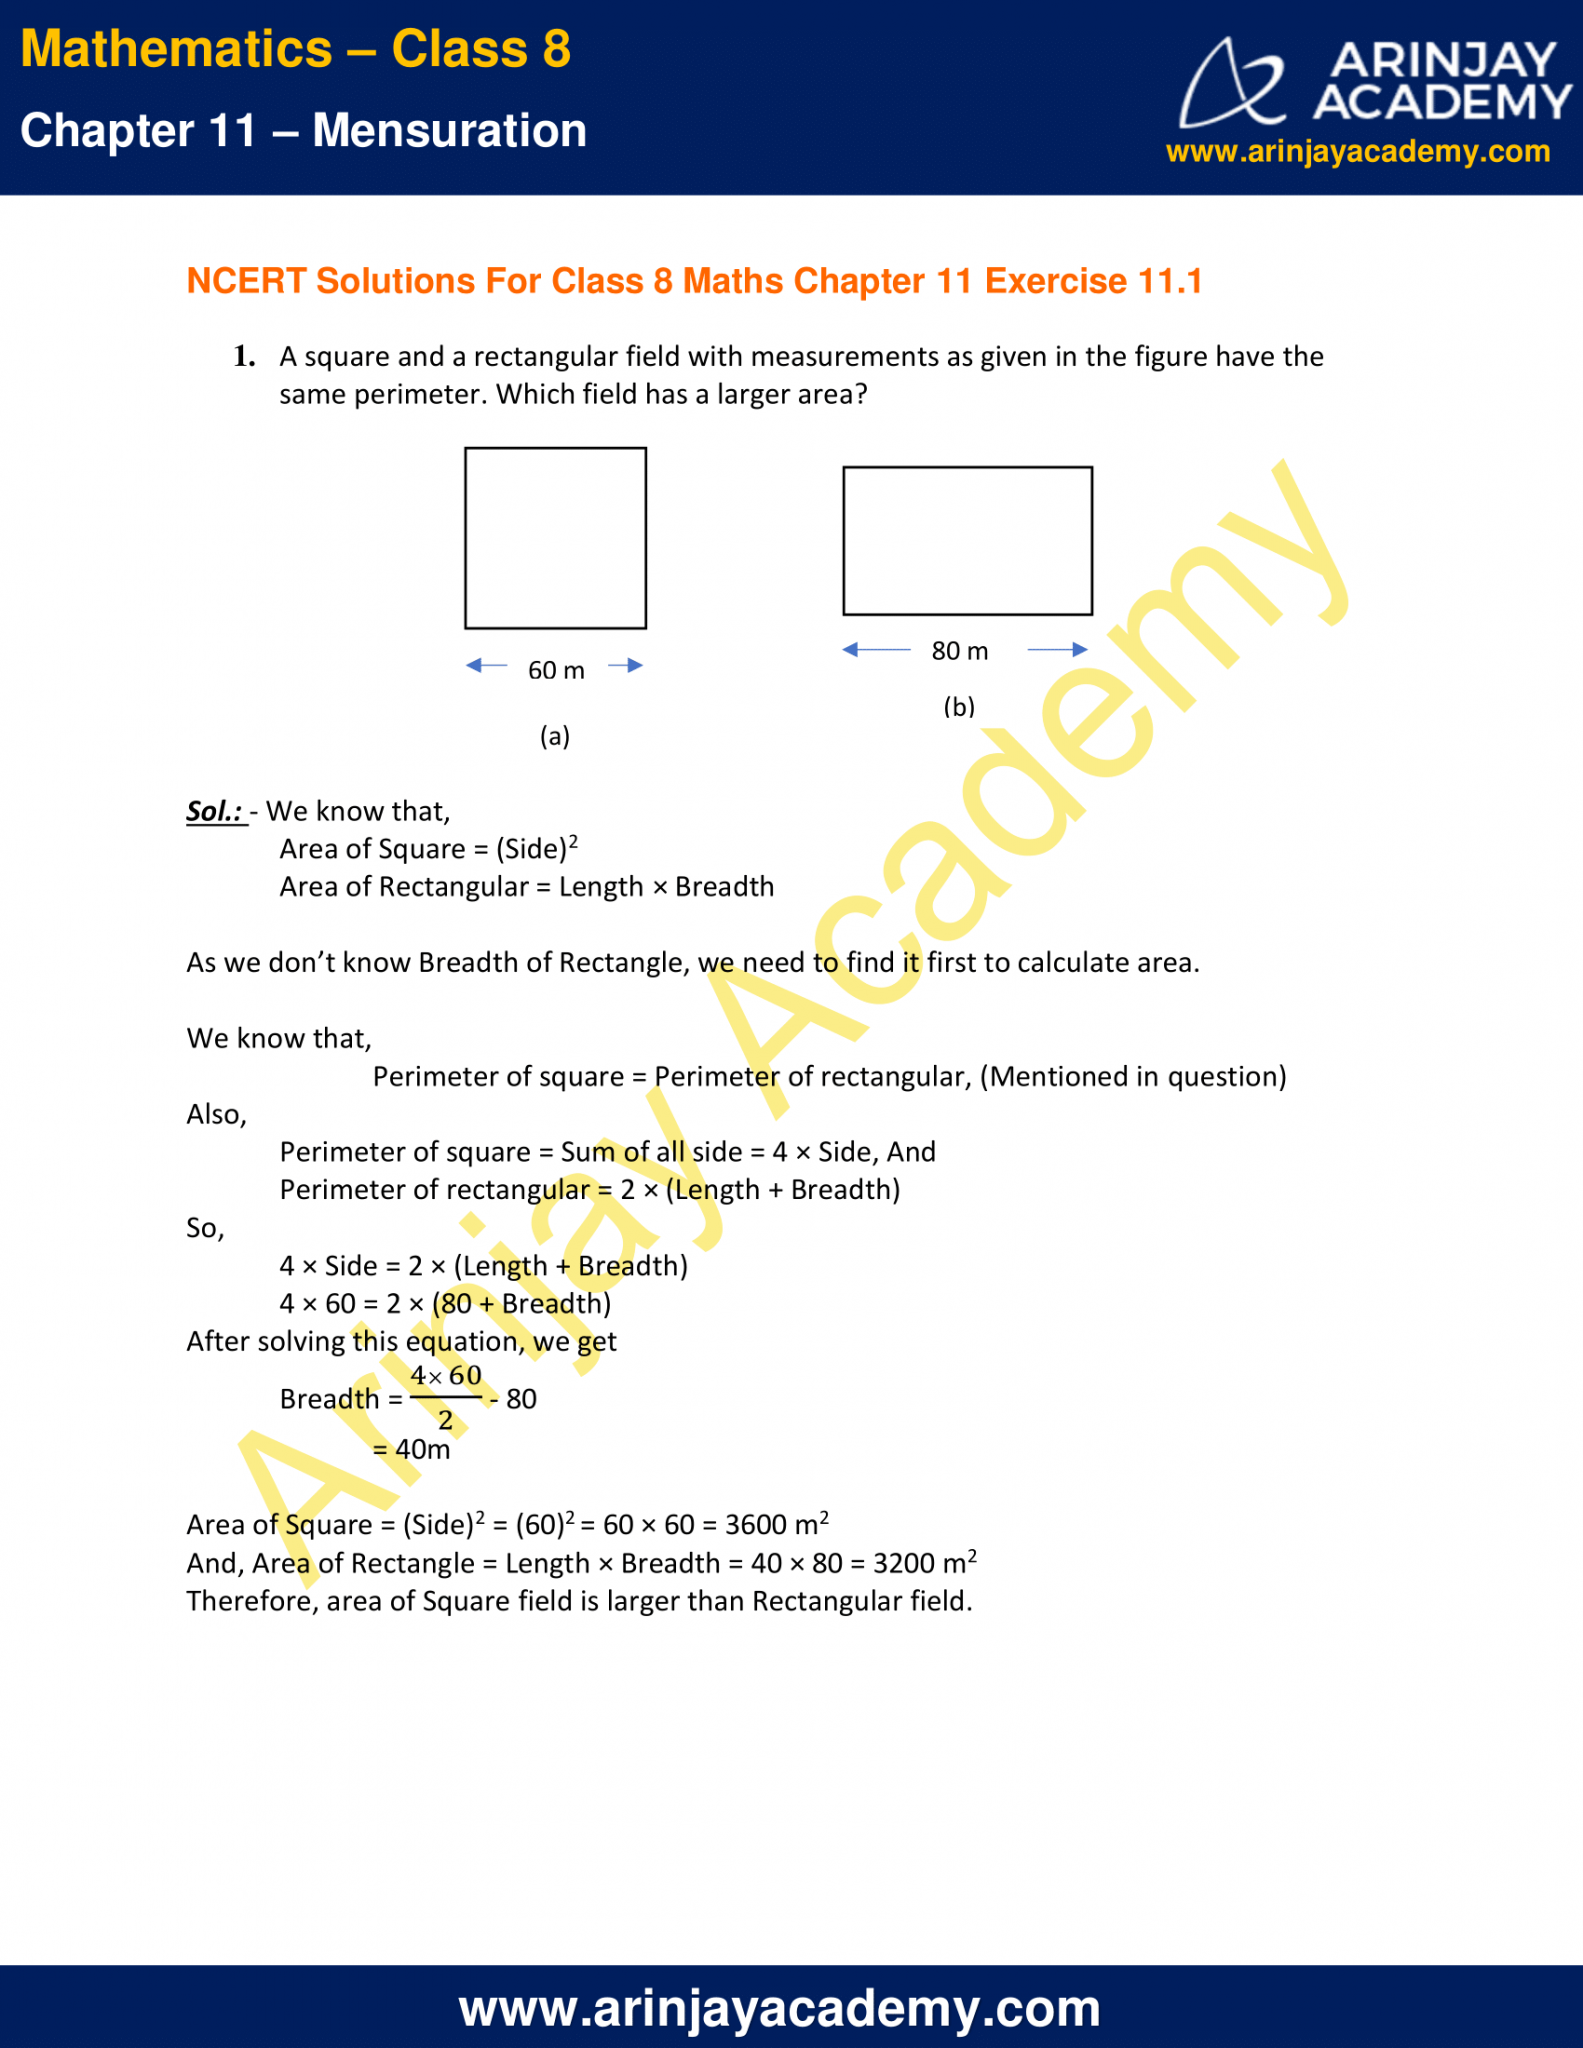 ncert-solutions-for-class-8-maths-chapter-11-exercise-11-1-mensuration